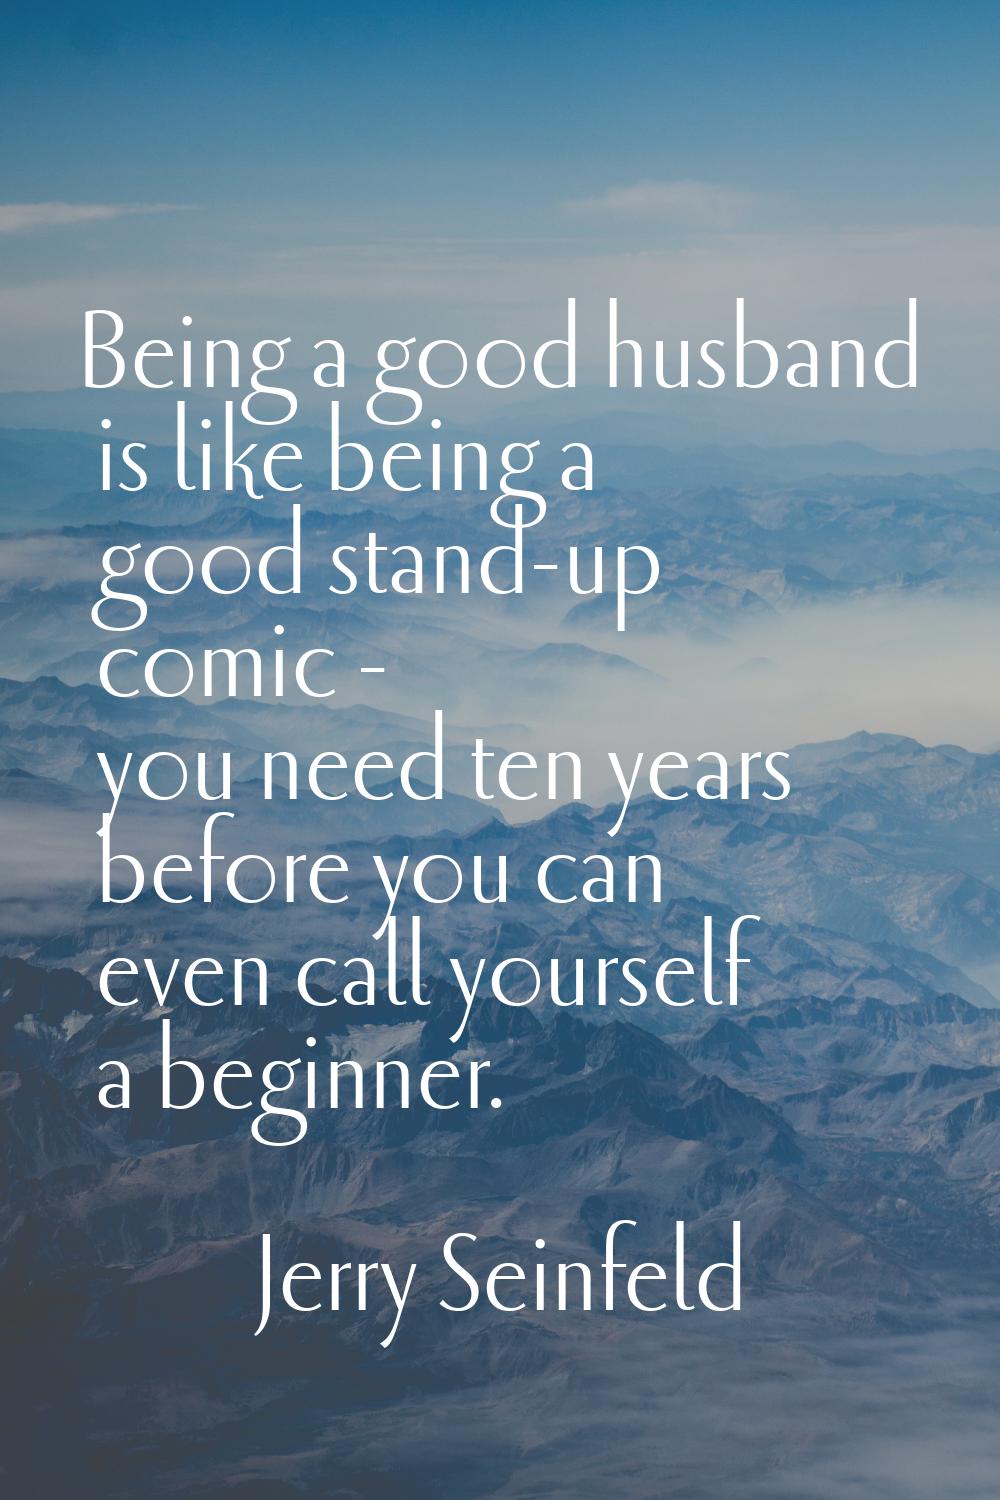 Being a good husband is like being a good stand-up comic - you need ten years before you can even c